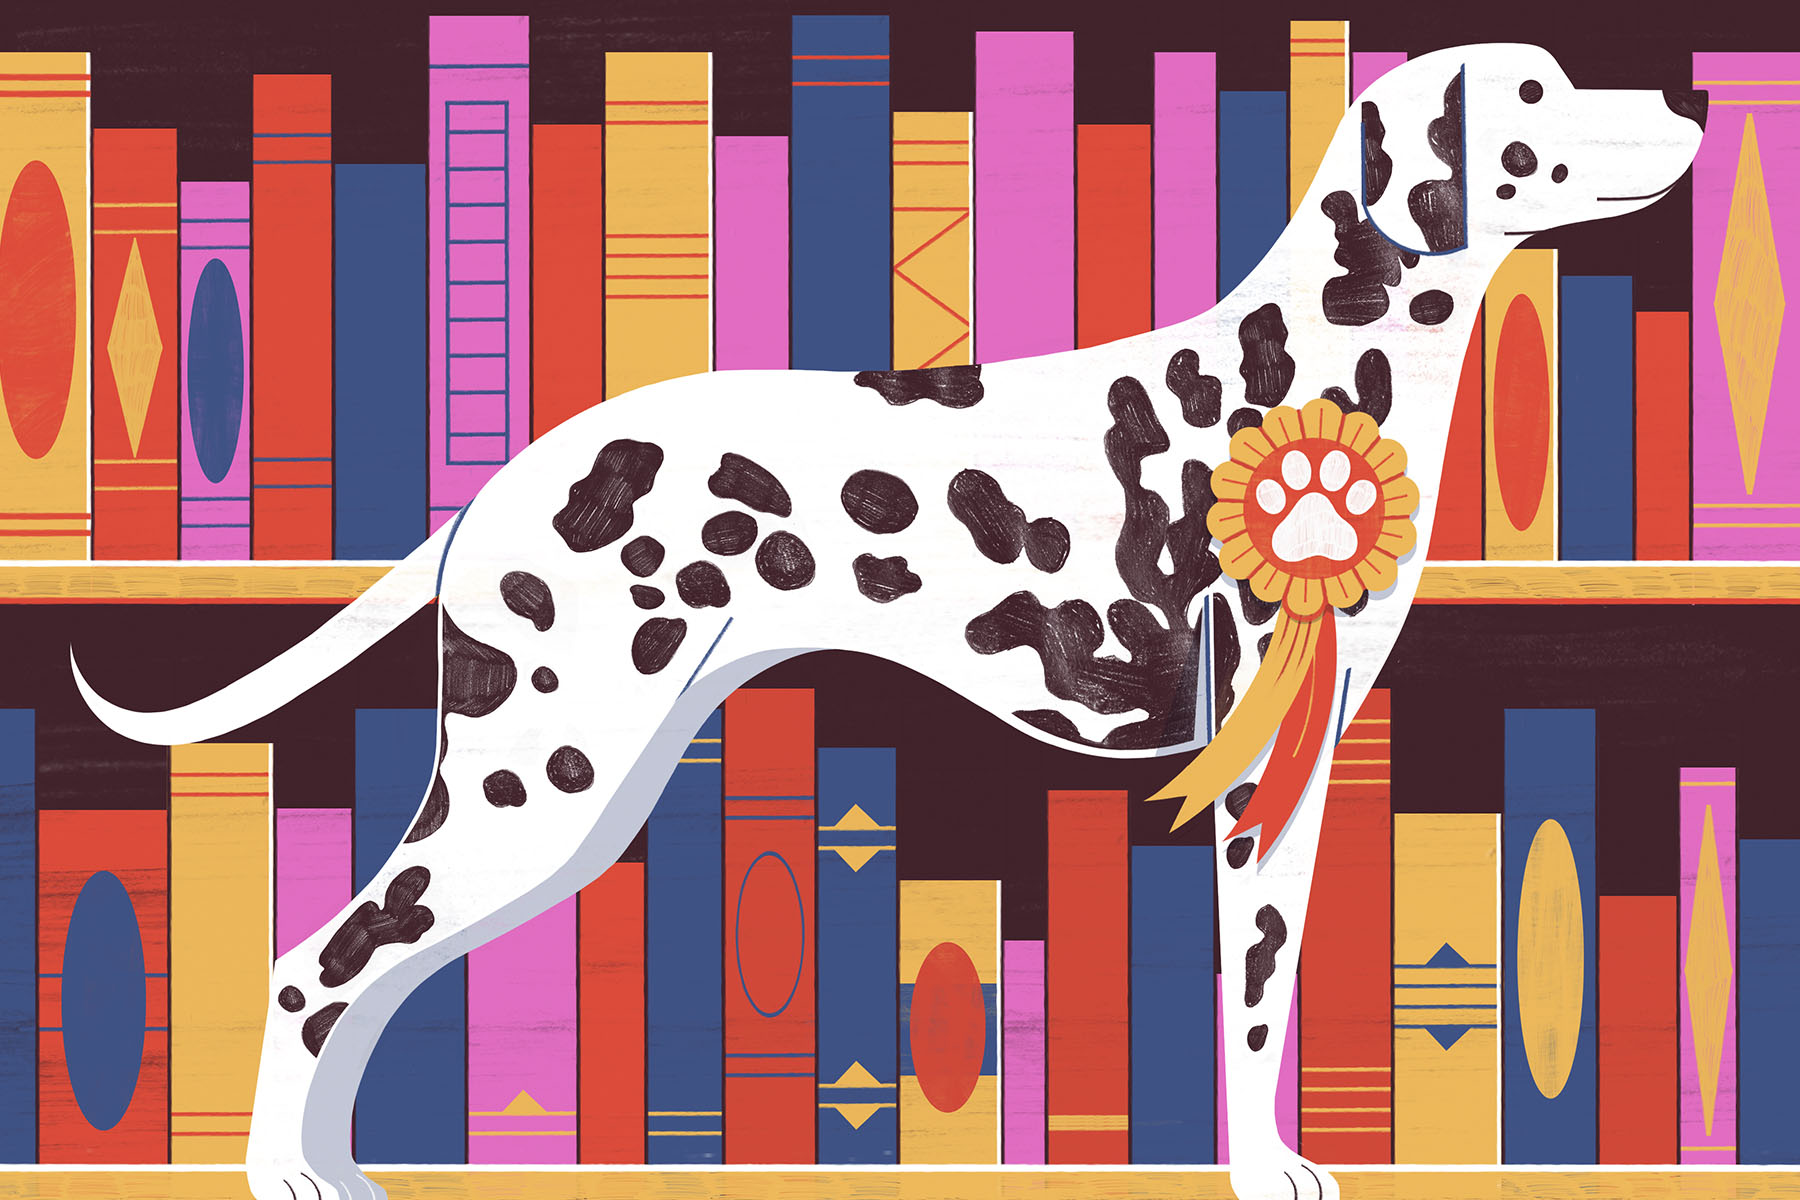 An illustration of a Dalmatian dog standing in front of a bookcase full of books.